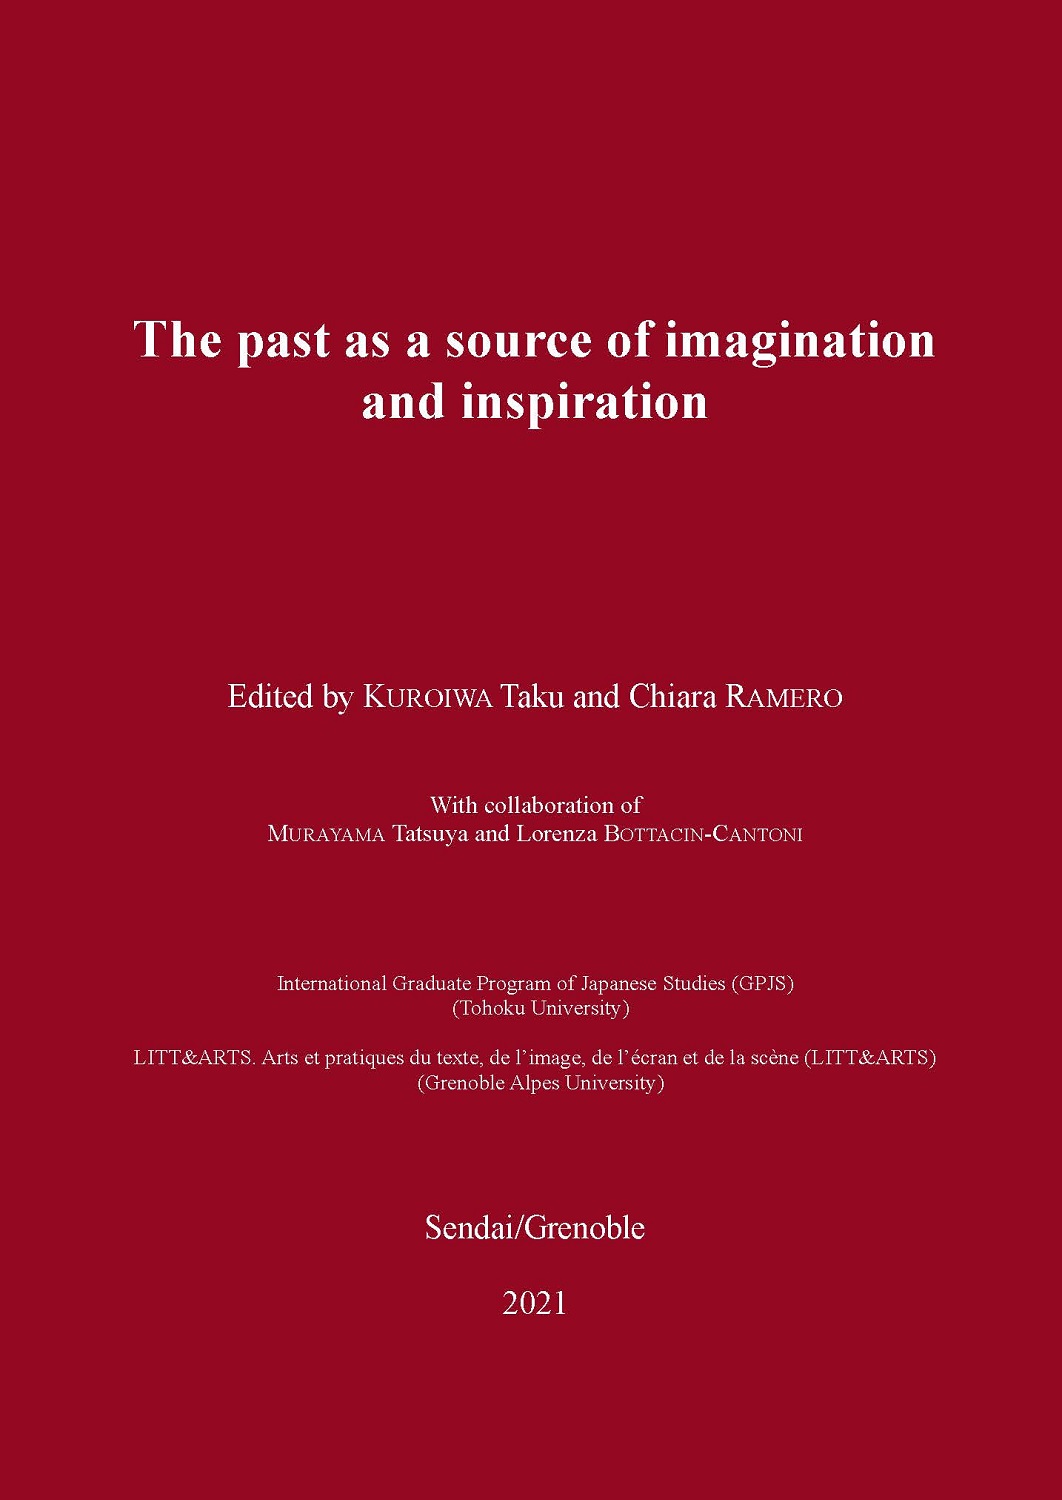 The past as a source of imagination and inspiration